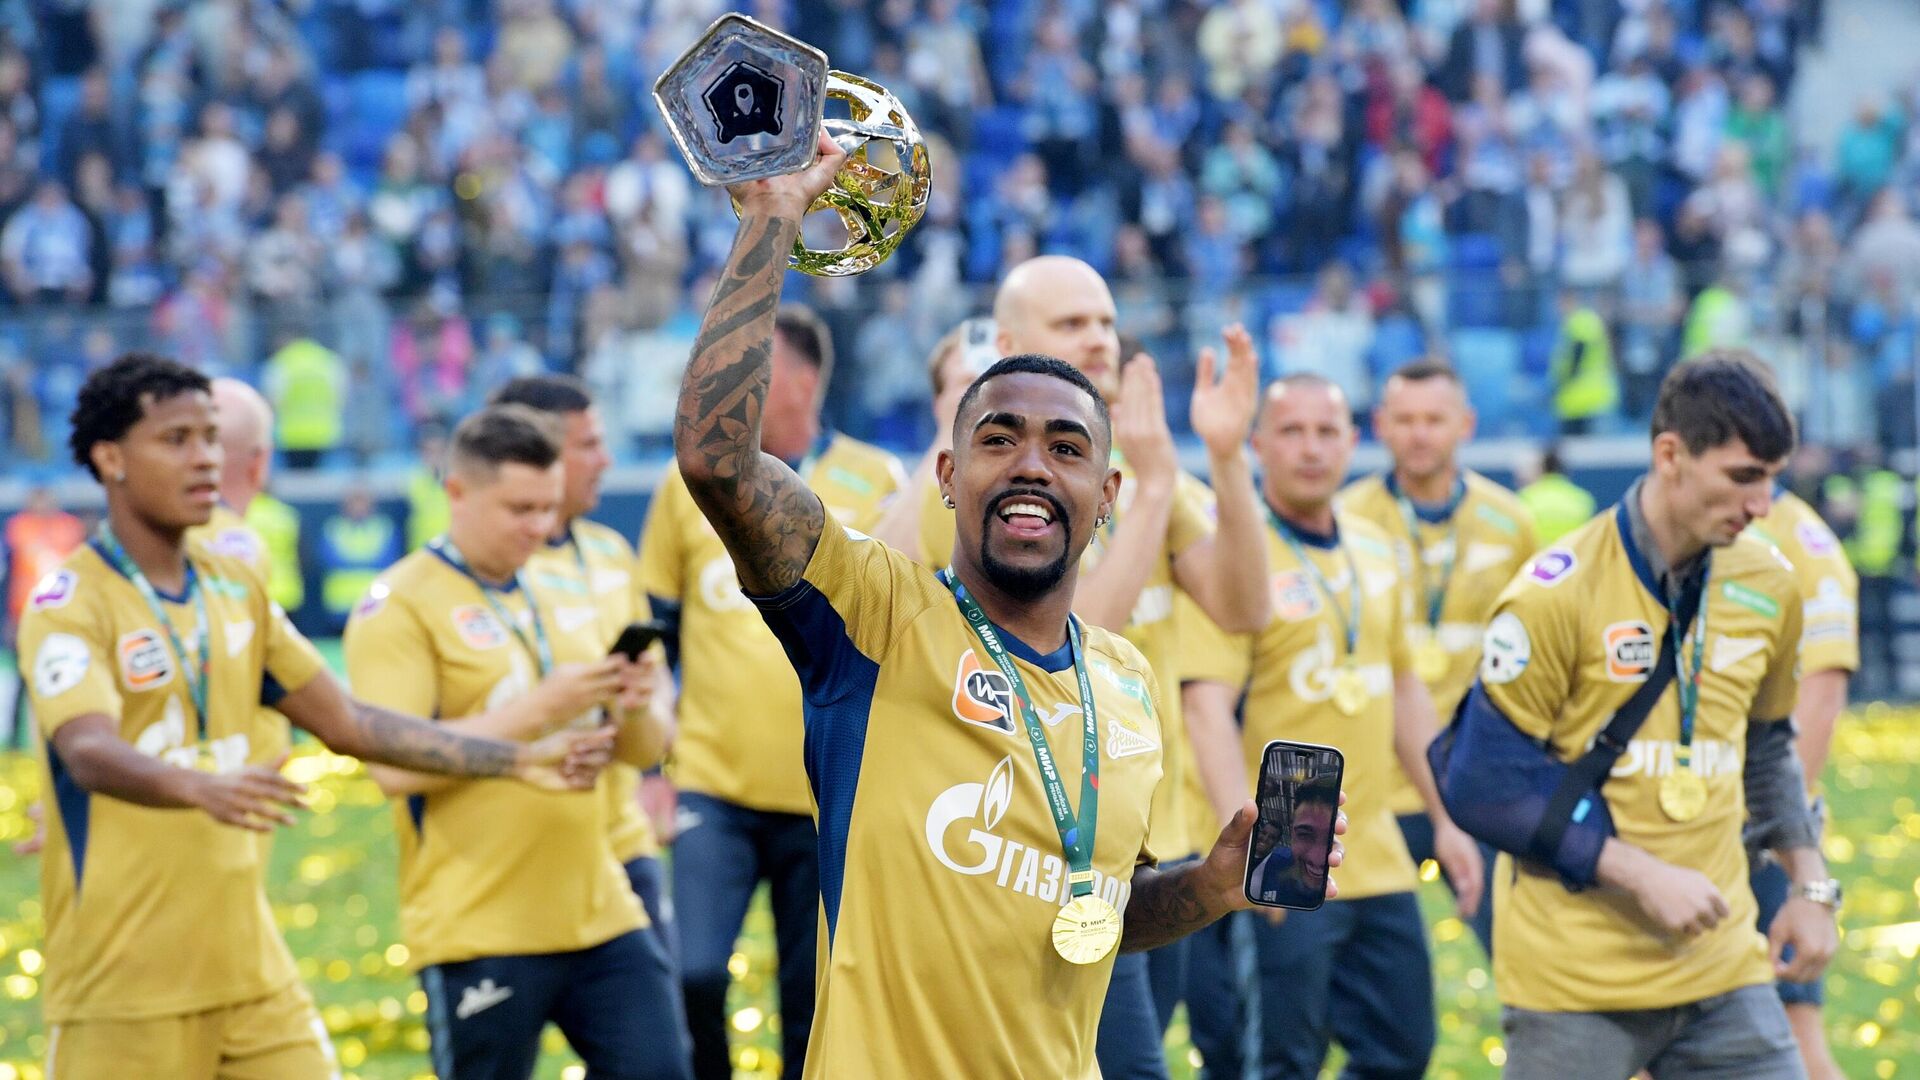 Malcolm is the top scorer of the 2022/23 RPL season